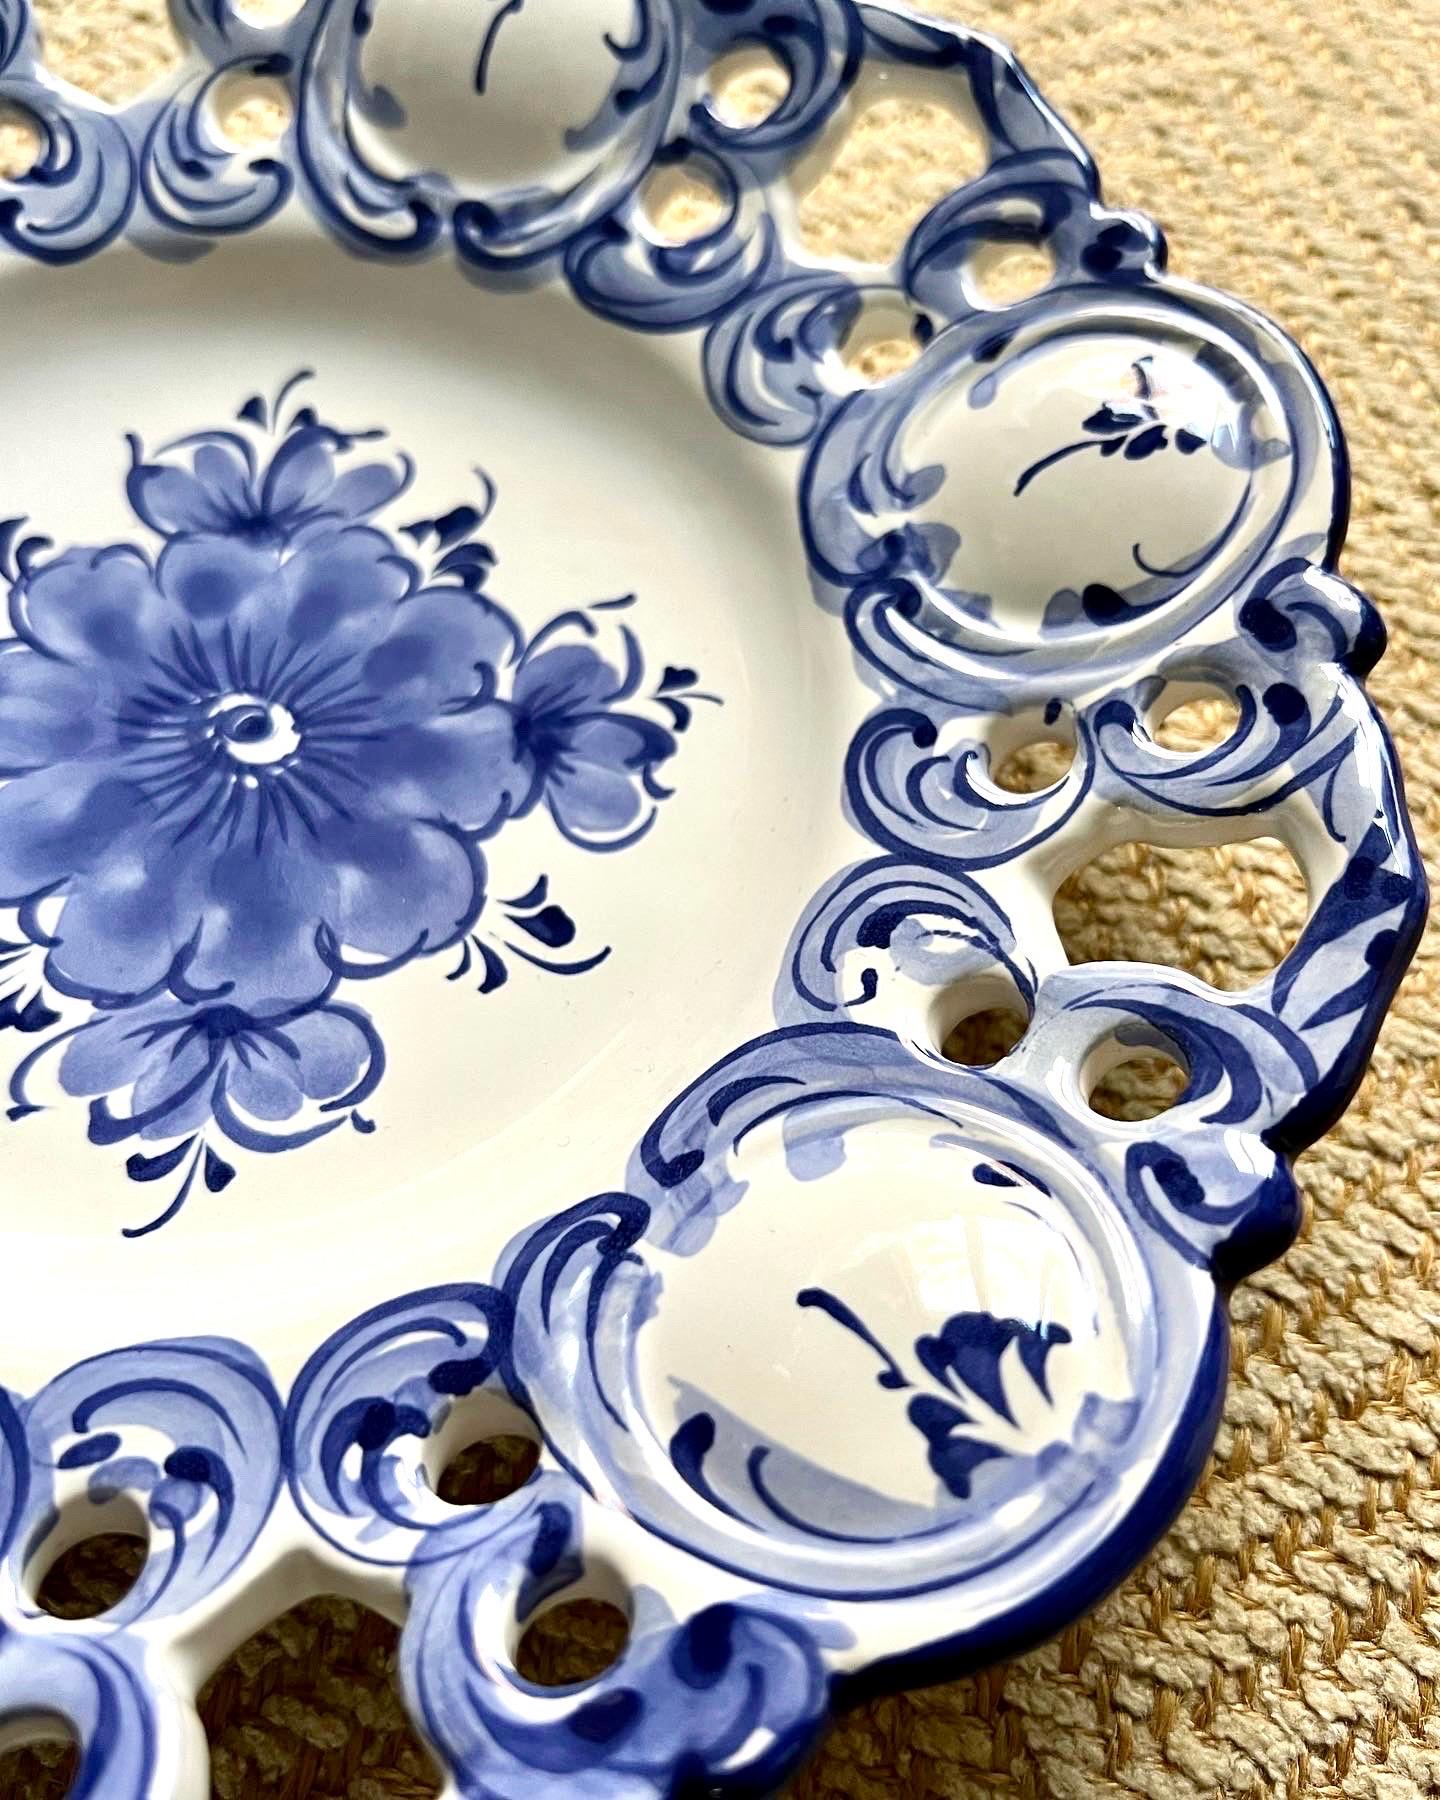 A rare set of 6 hand-painted blue and white pottery hanging wall plates. Only 2 plates have existing wire for hanging but all of them have holes for wire. Each plate is numbered and made in Portugal; they are not signed but look like Vestal